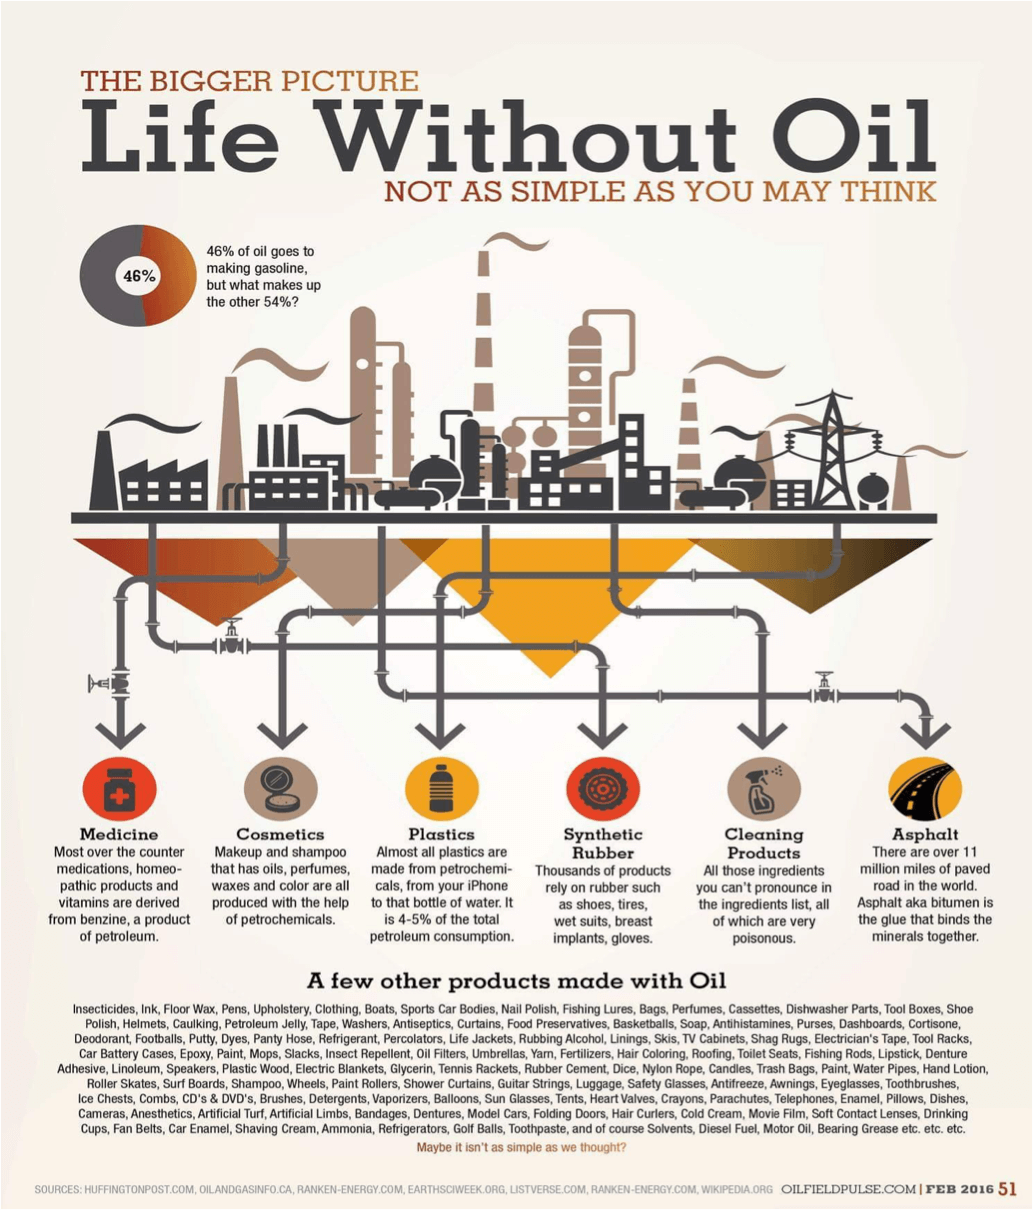 A World Without Oil